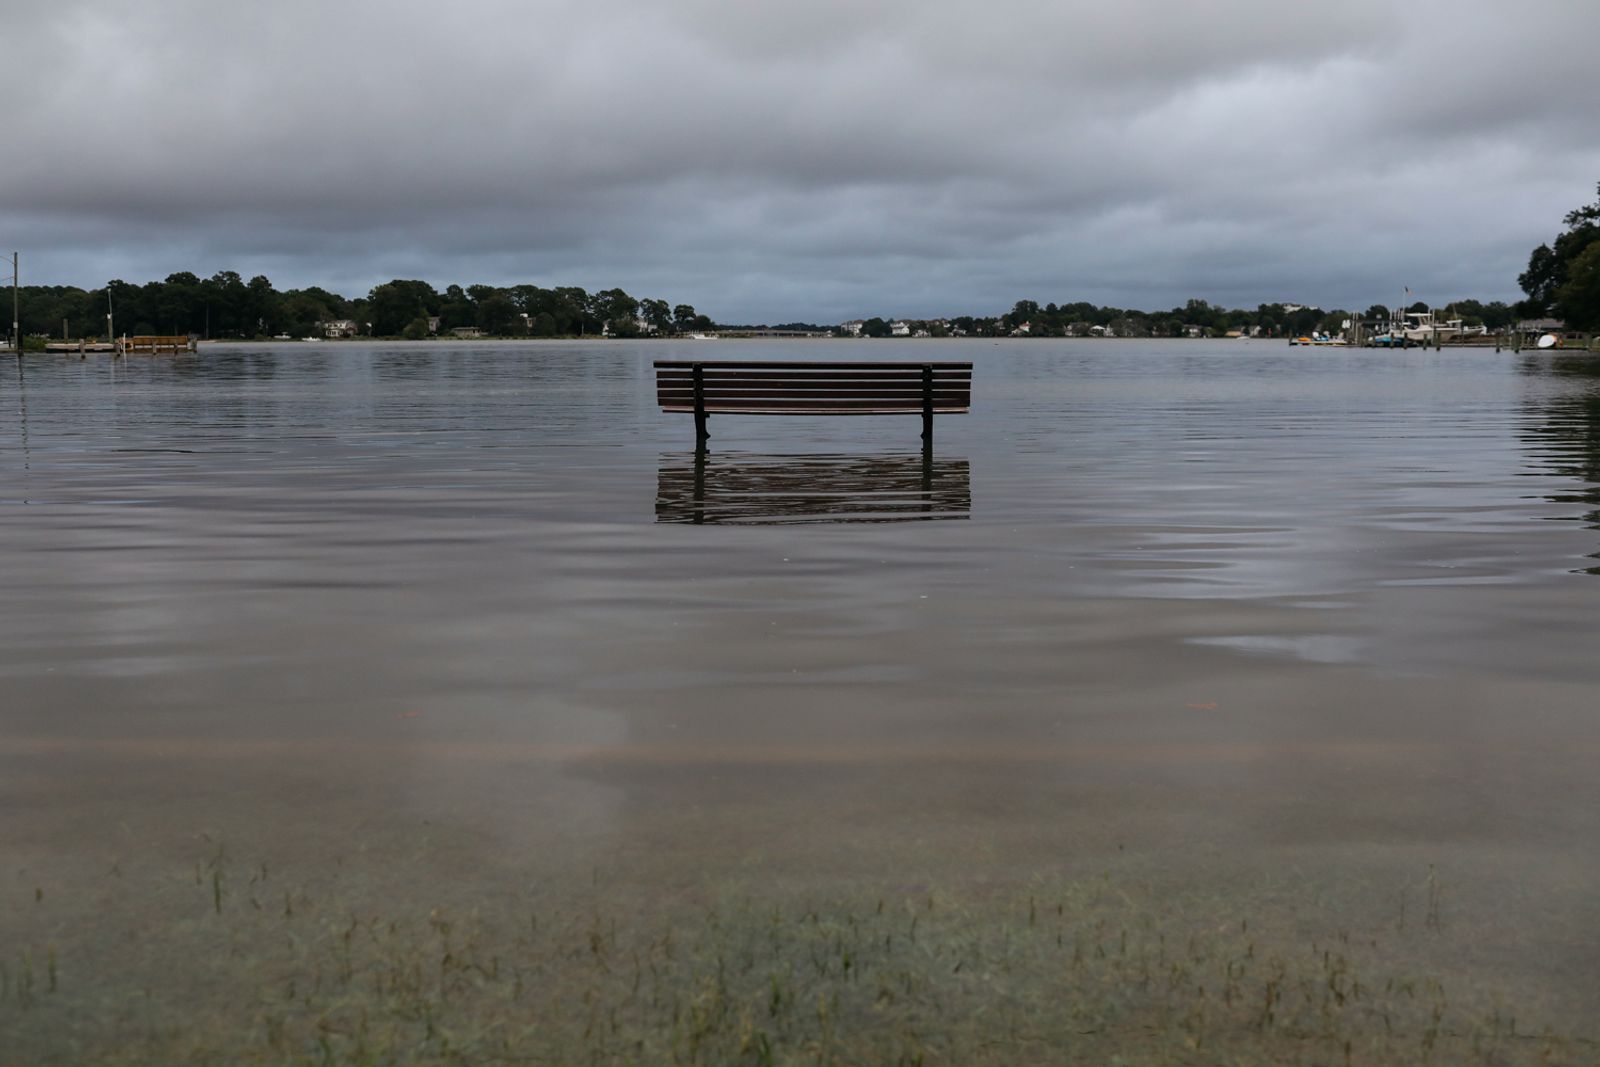 © Angela Ramsey - A park bench sits alone in the water.